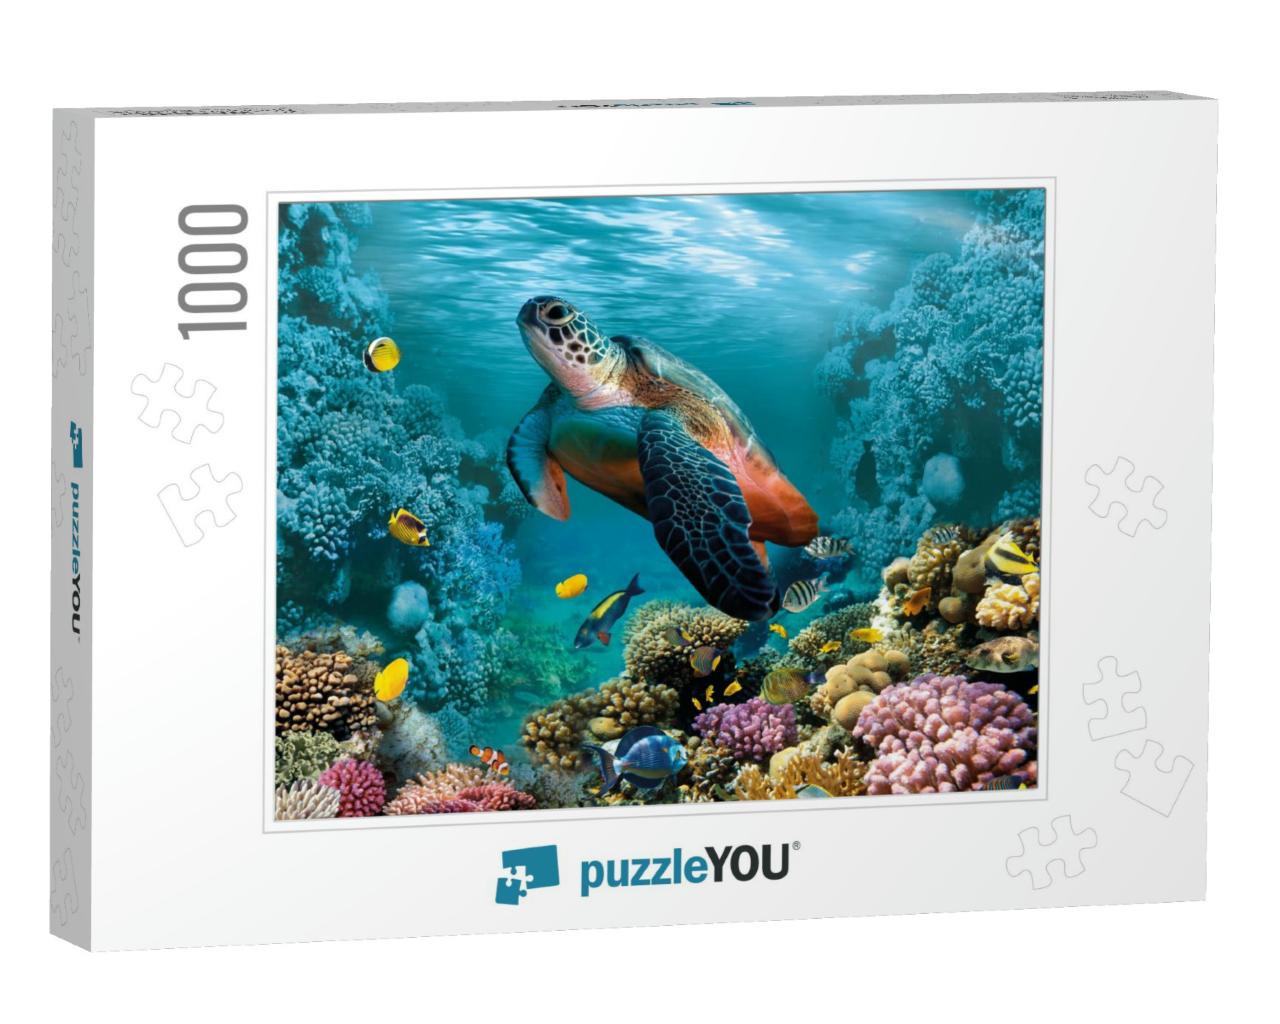 Image for 3D Floor. Underwater World. Turtle. Corals... Jigsaw Puzzle with 1000 pieces